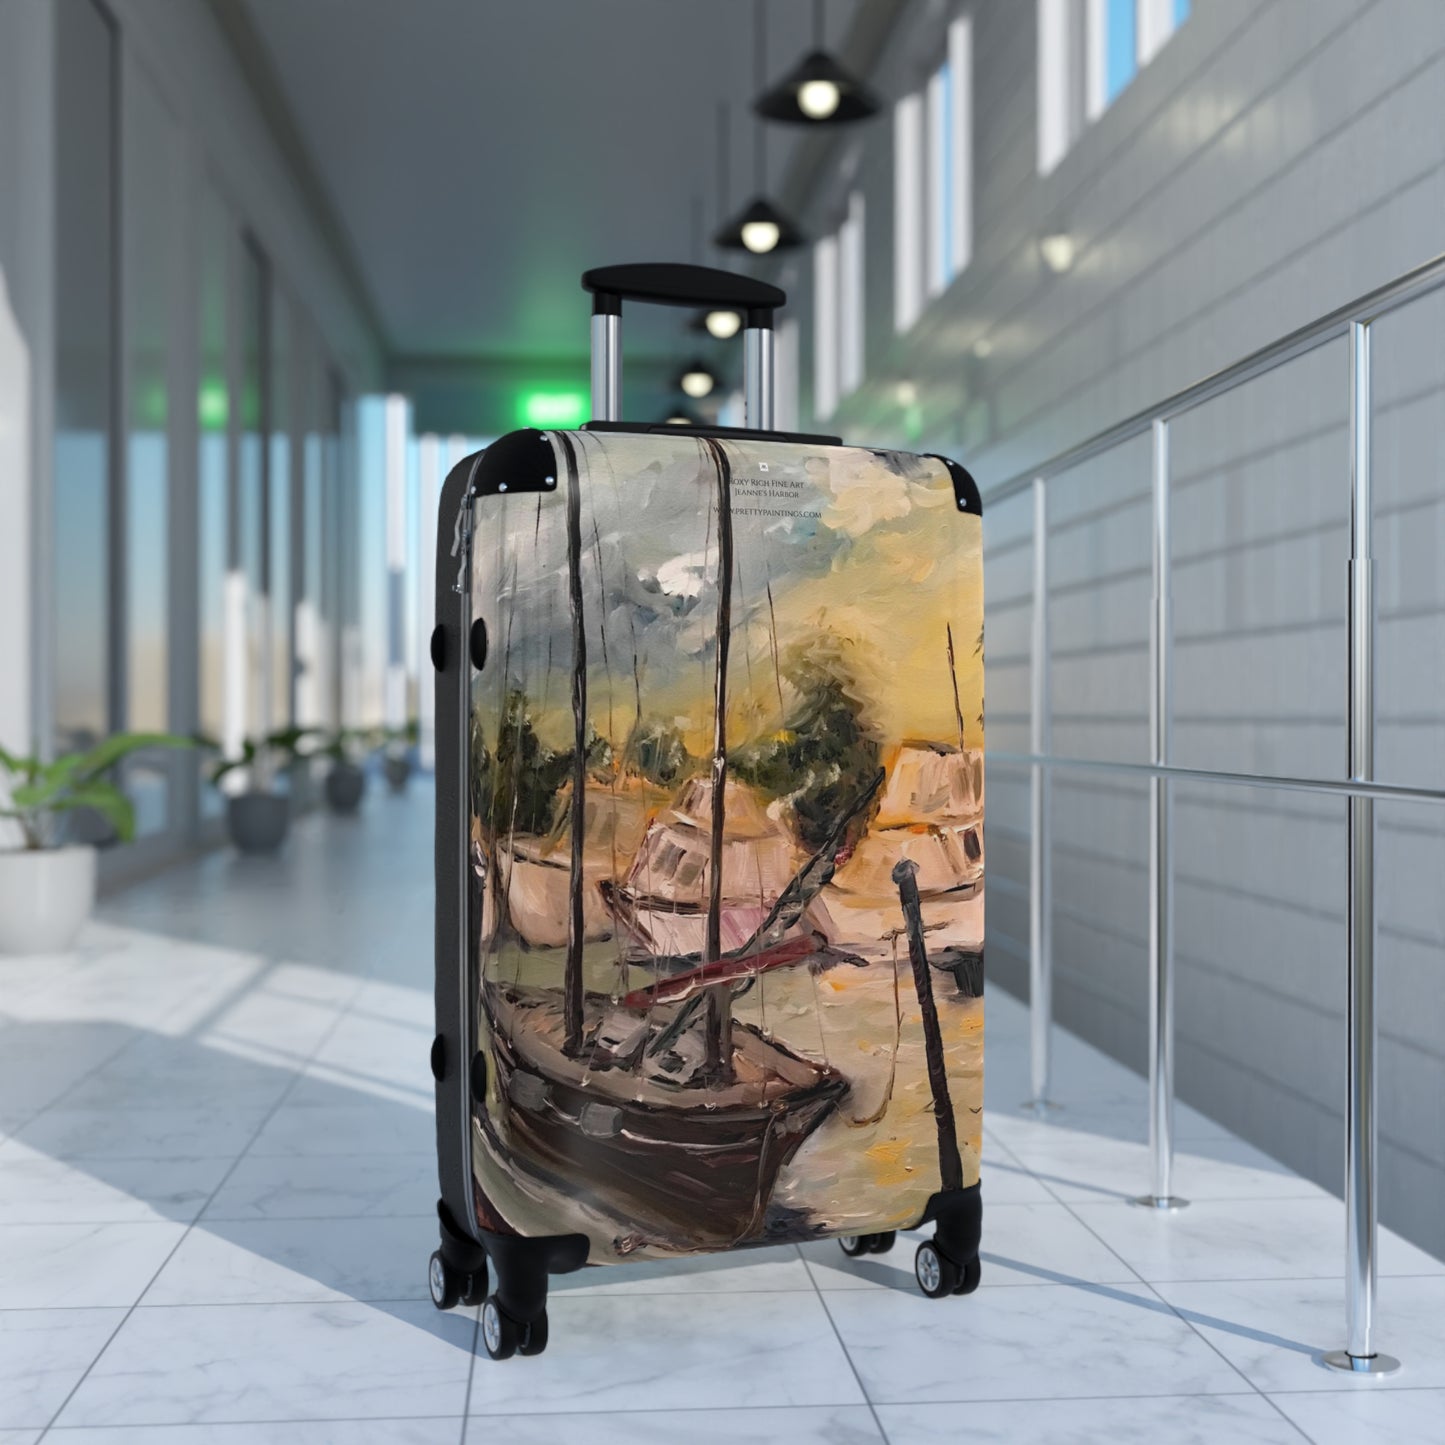 Jeanne's Harbor Carry on Suitcase + 2 Sizes